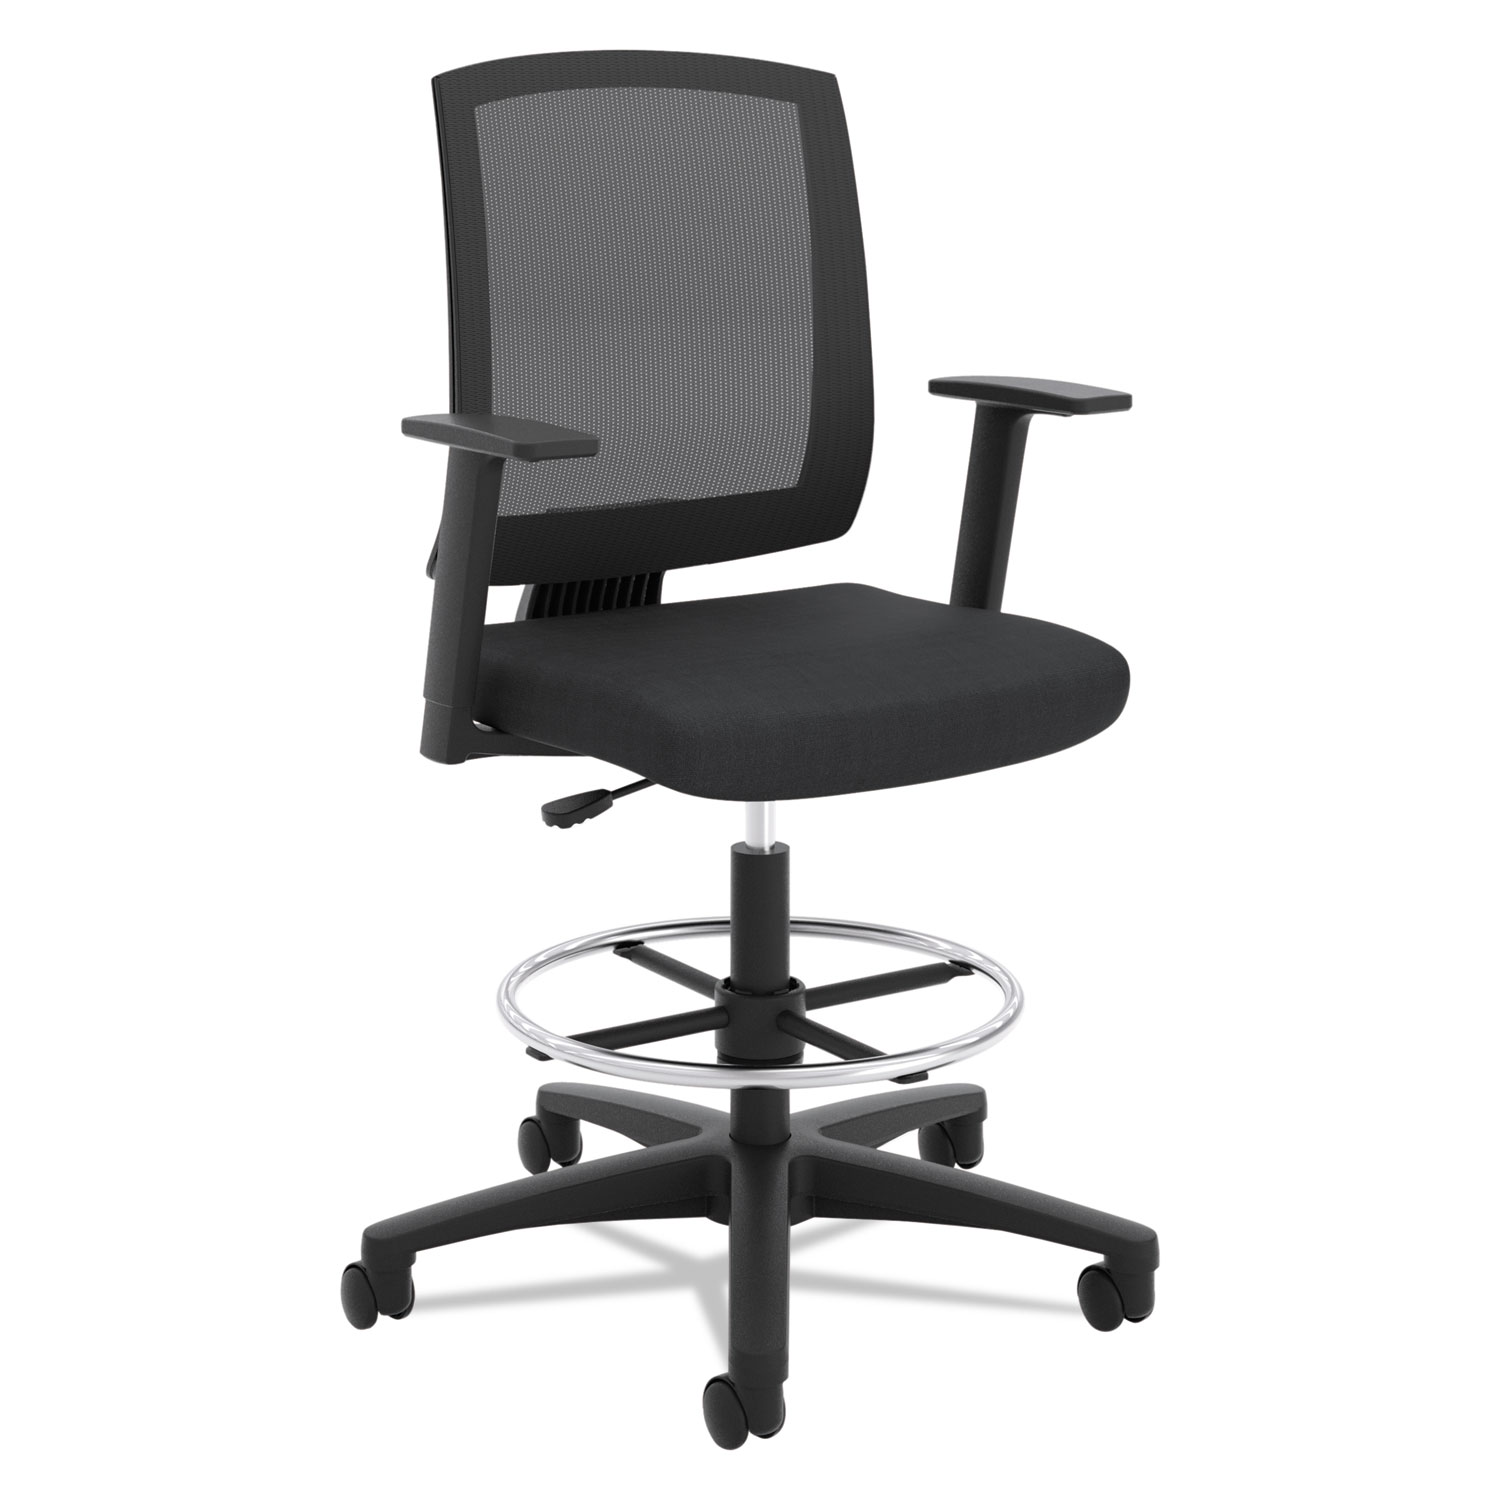  HON HVL515.LH10 VL515 Mid-Back Mesh Task Stool with Fixed Arms, Supports up to 250 lbs., Black Seat/Black Back, Black Base (BSXVL515LH10) 